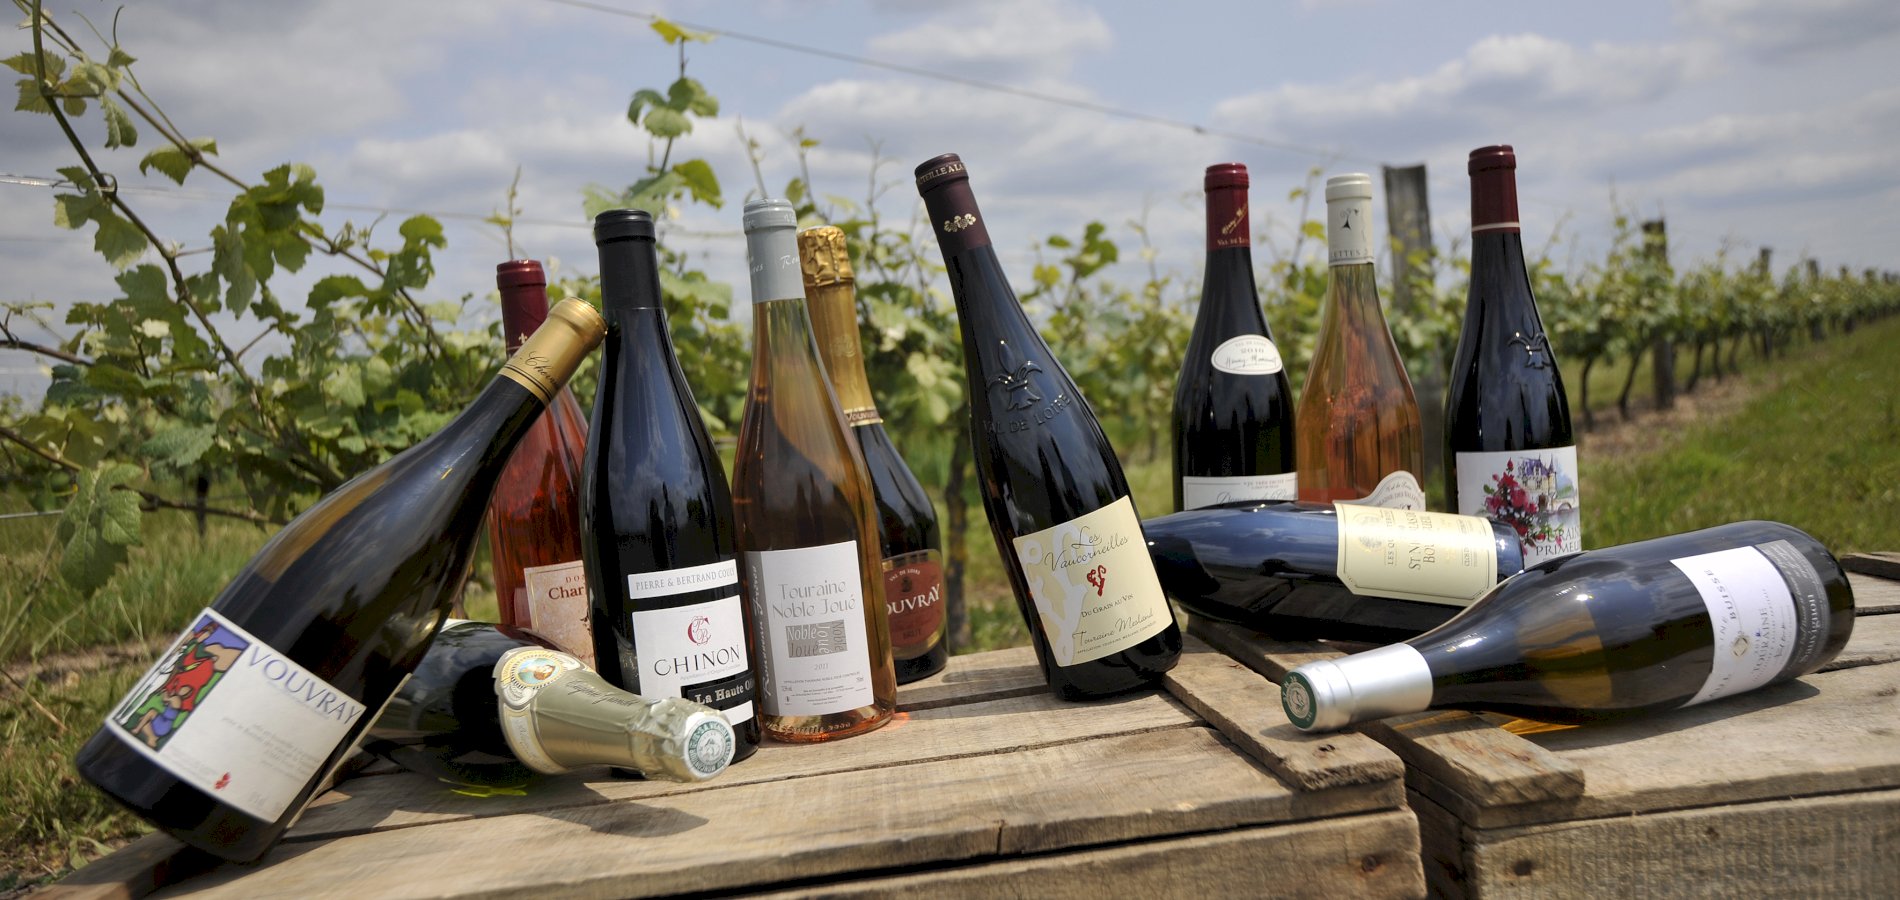 Ophorus Tours - A Loire Valley Wine Tour from Tours to Chinon & Bourgueil vineyards